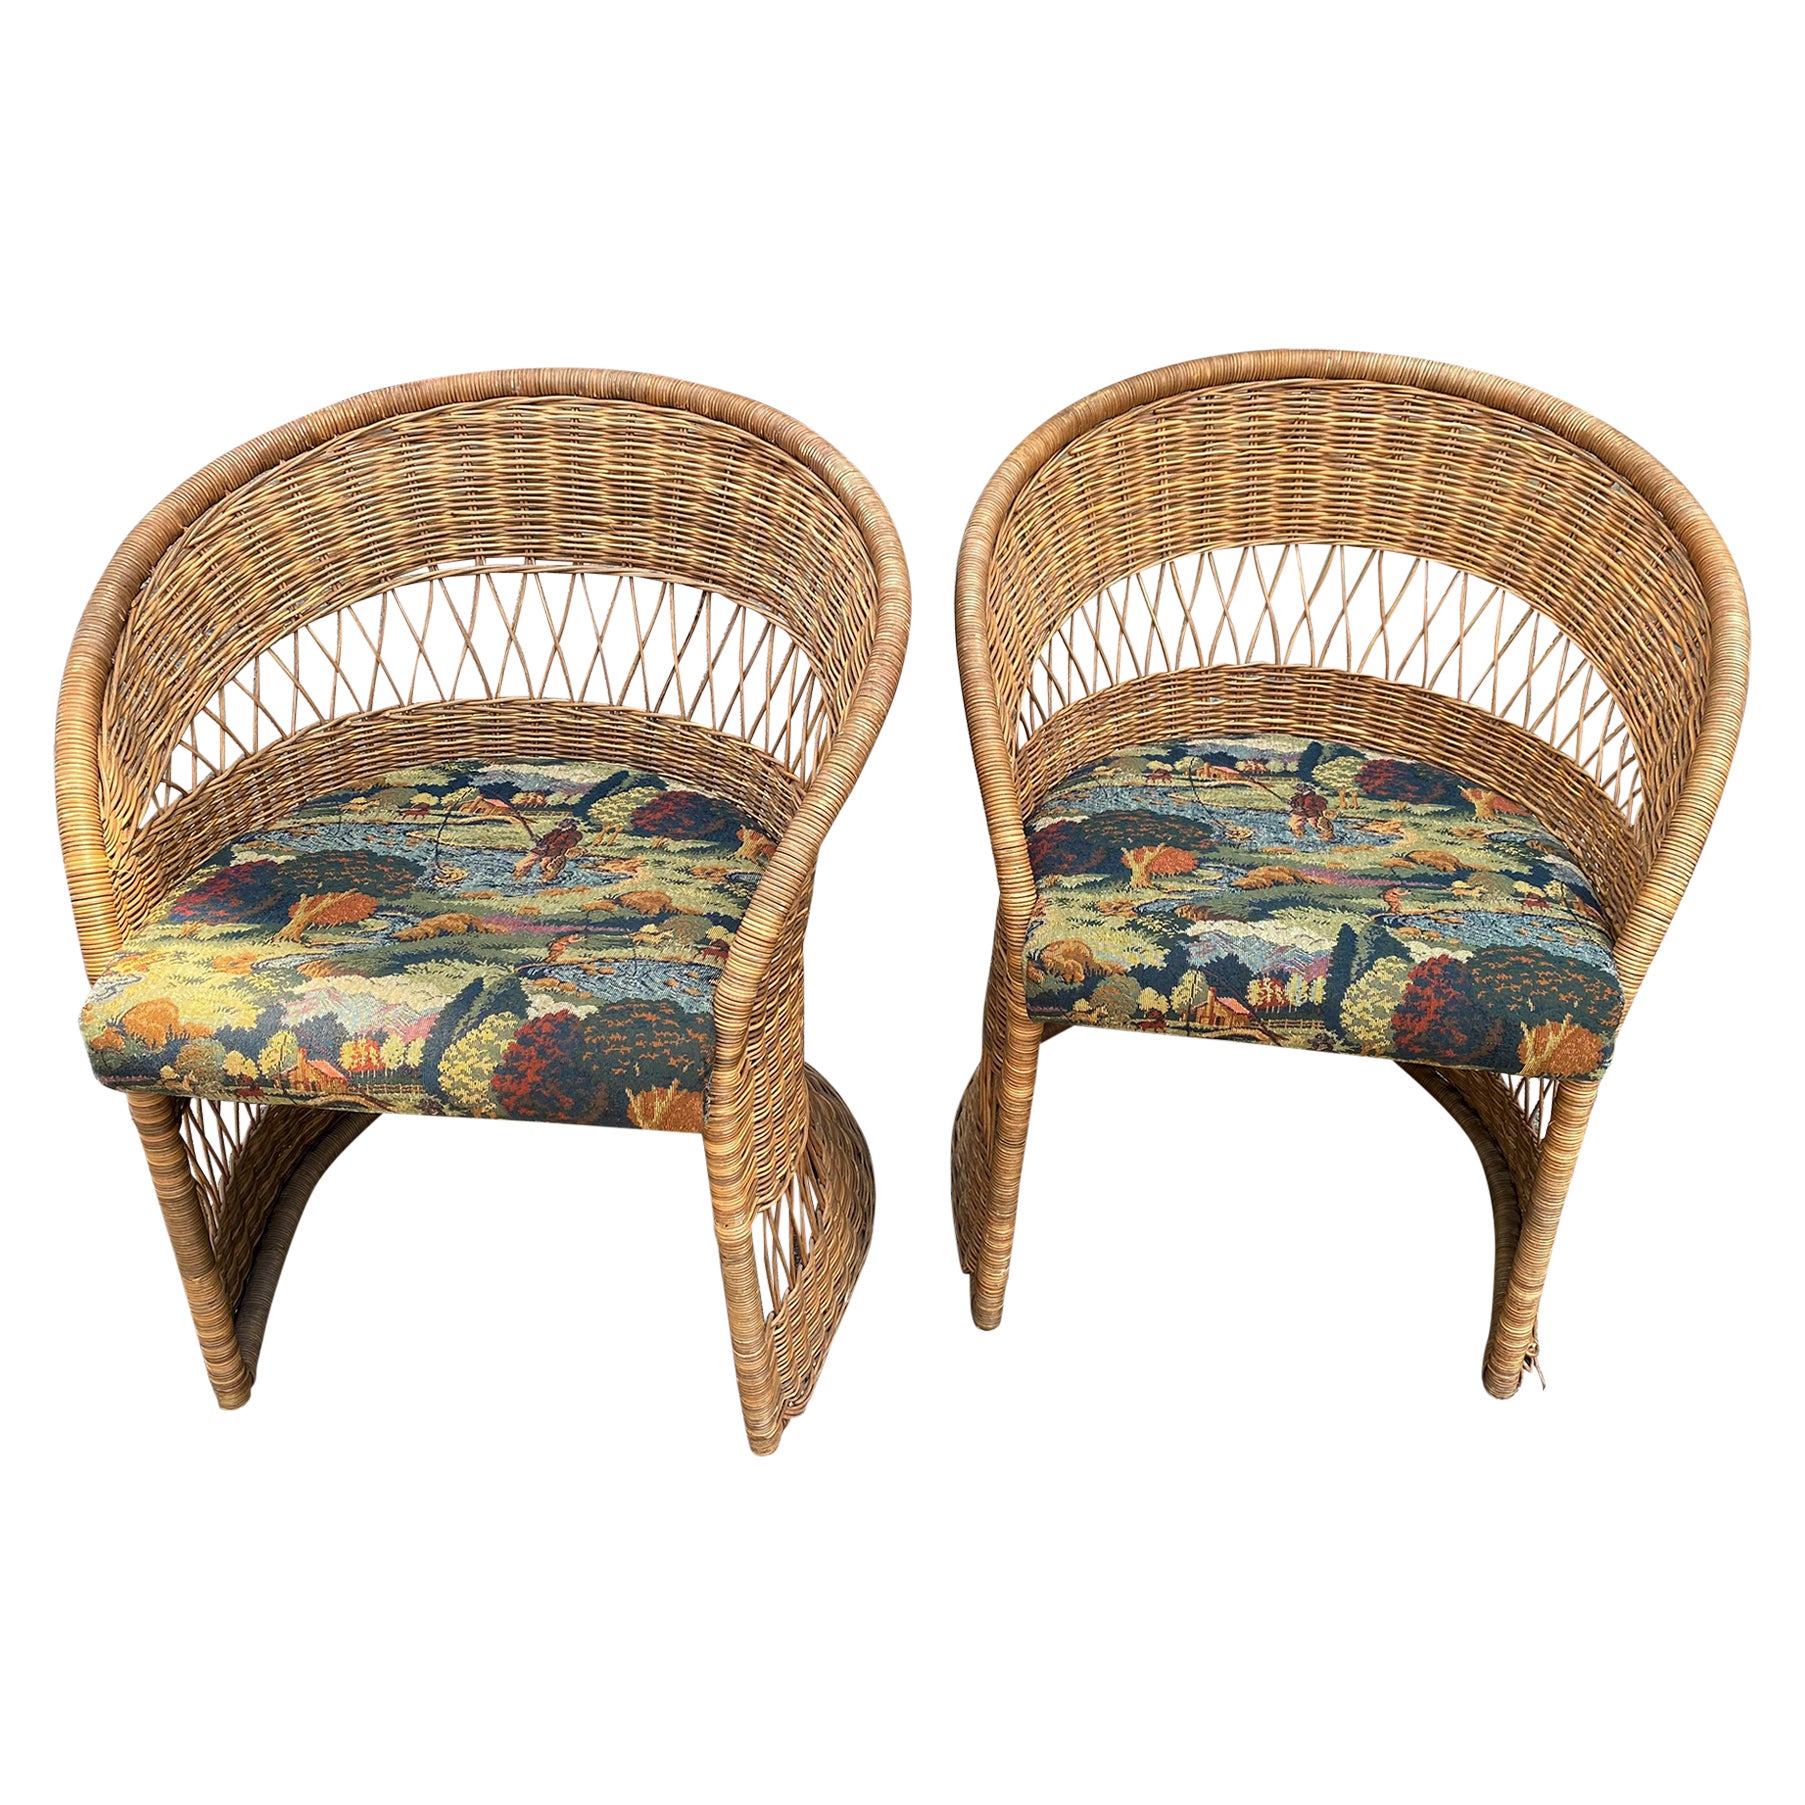 Natural Wicker/Rattan Mid Century Tulip/Barrel Chairs W/ Fishing Upholstery Pair For Sale